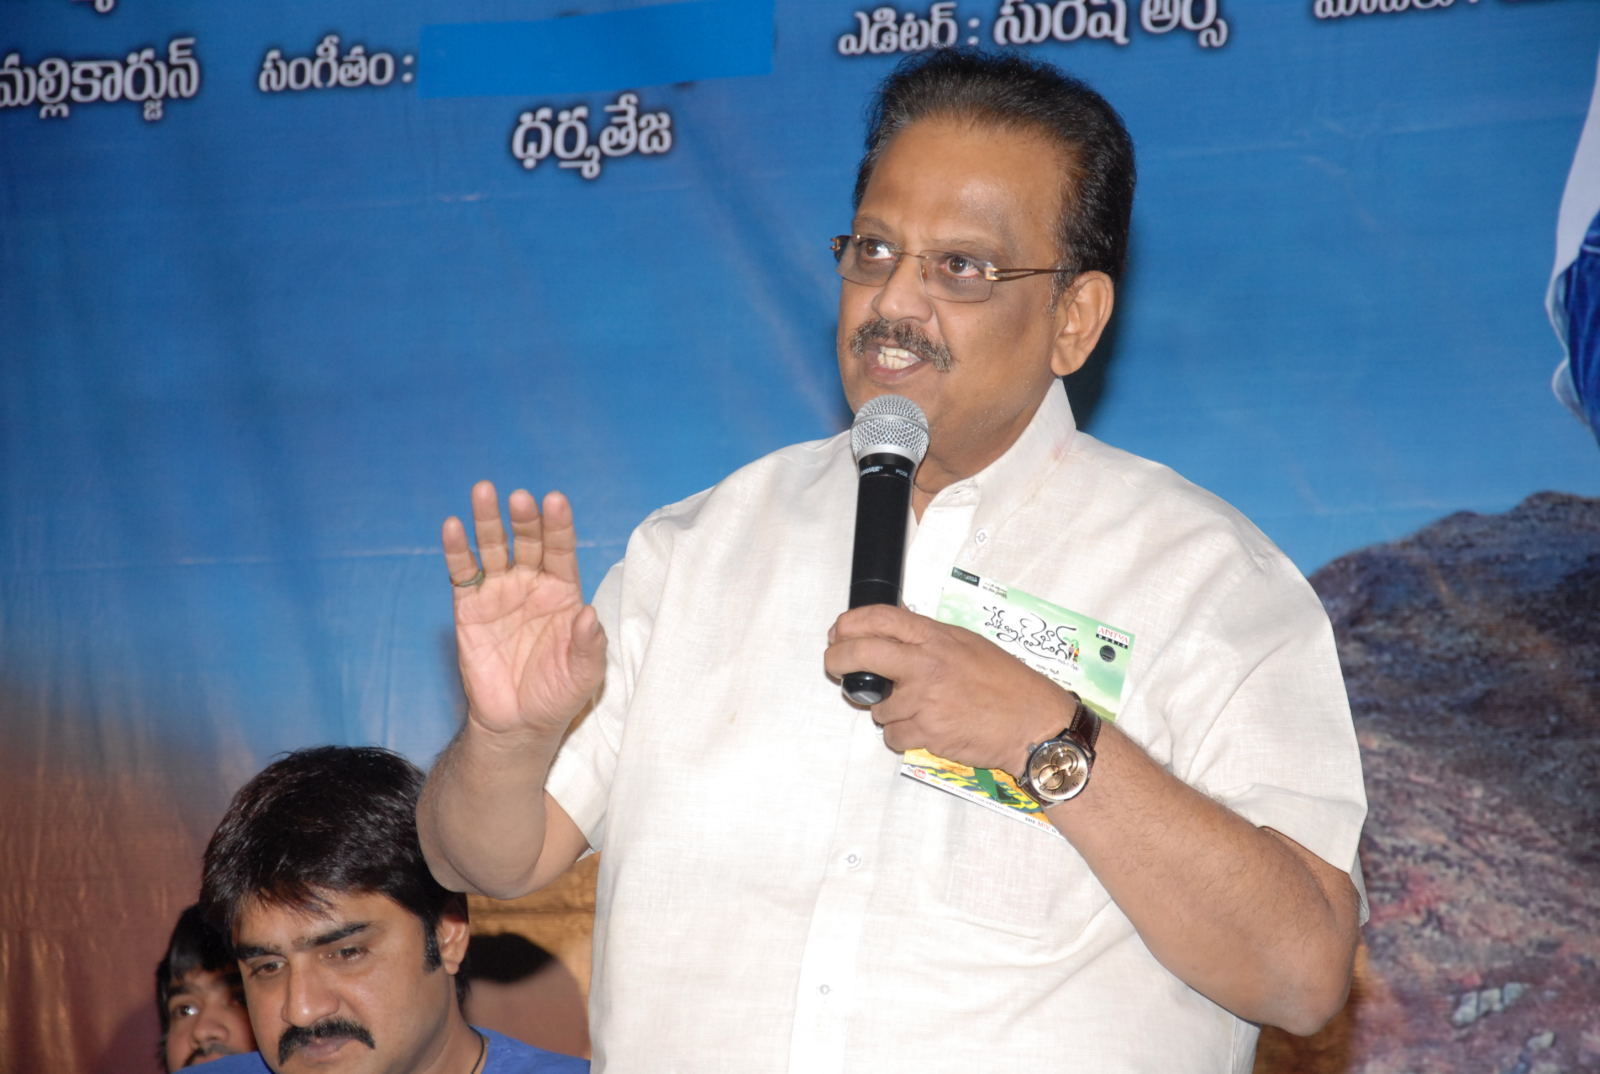 S. P. Balasubrahmanyam - Made in Vizag Audio Launch Pictures | Picture 325423